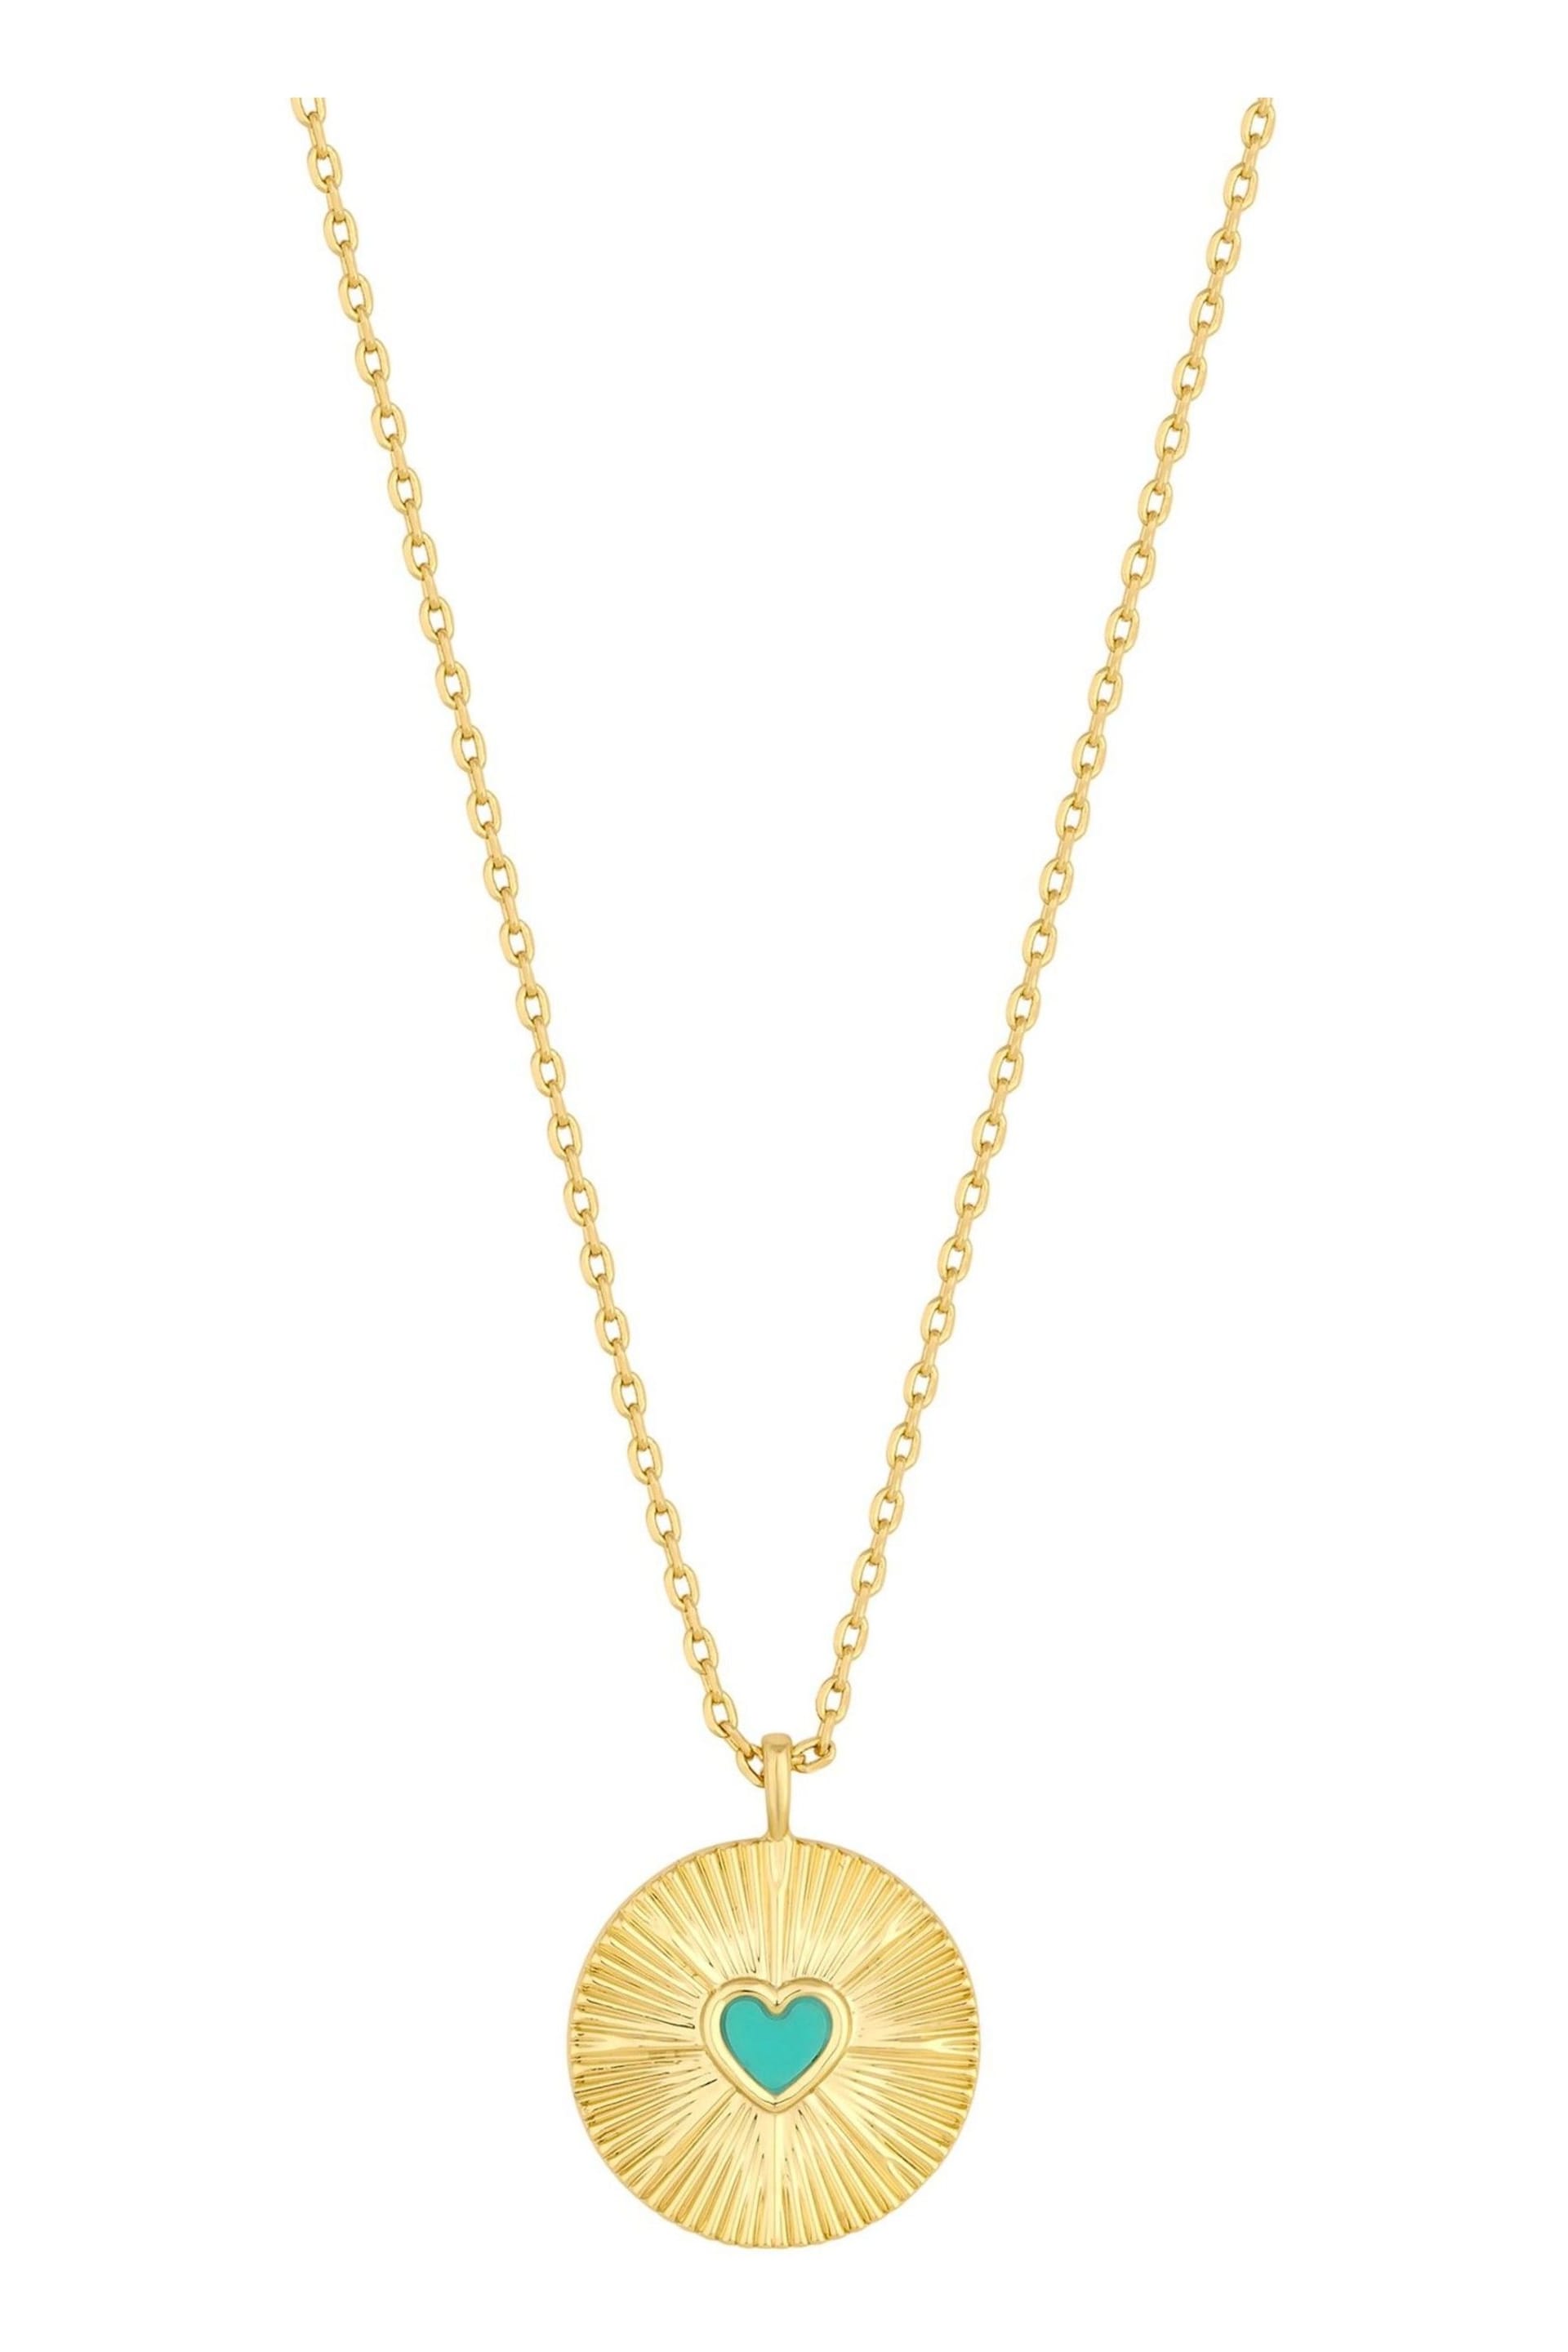 Inicio Gold Plated Heart Pendant Necklace - Image 1 of 2